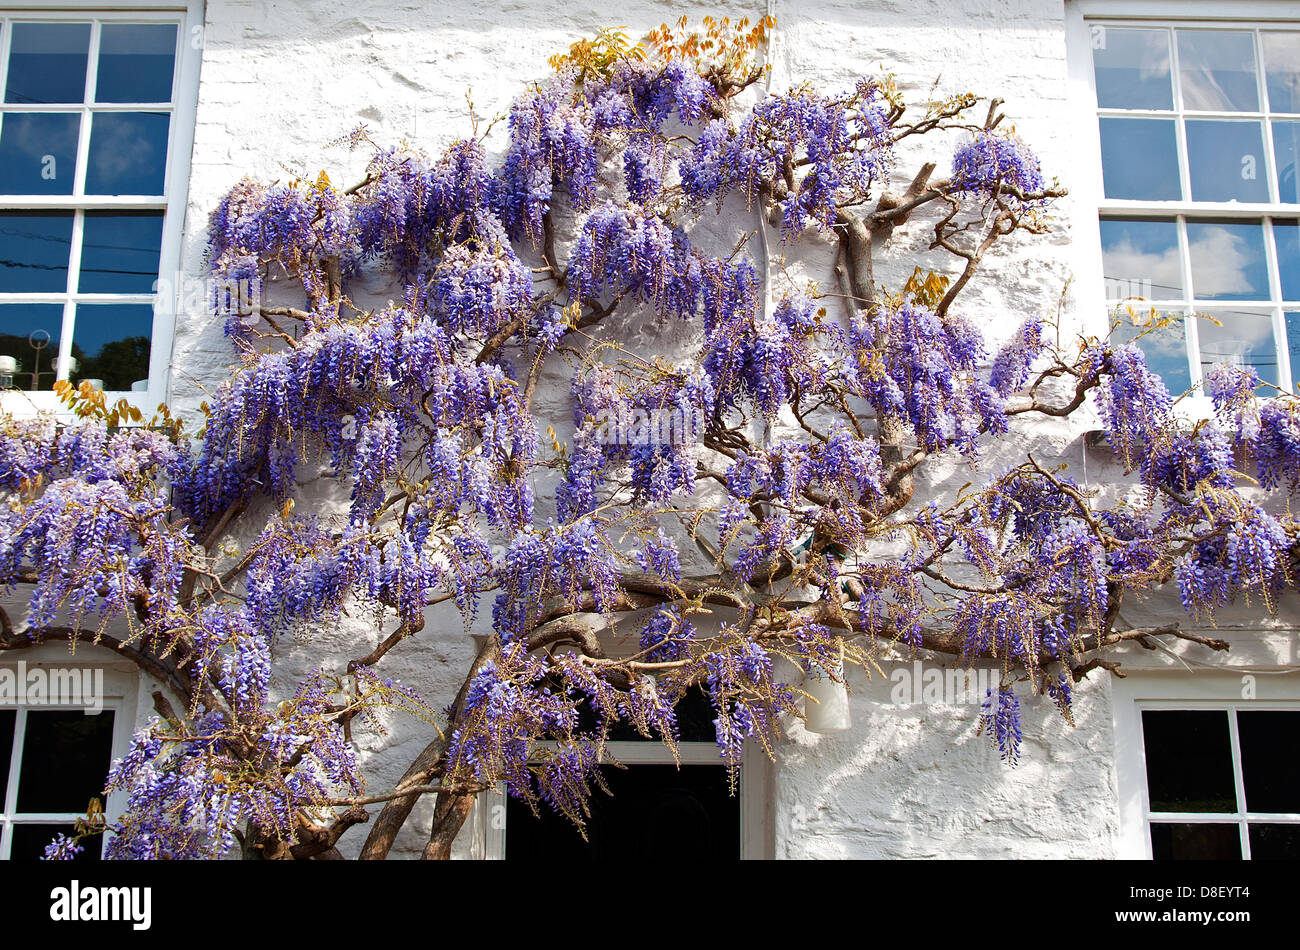 wisteria climbing on the front of a house Stock Photo